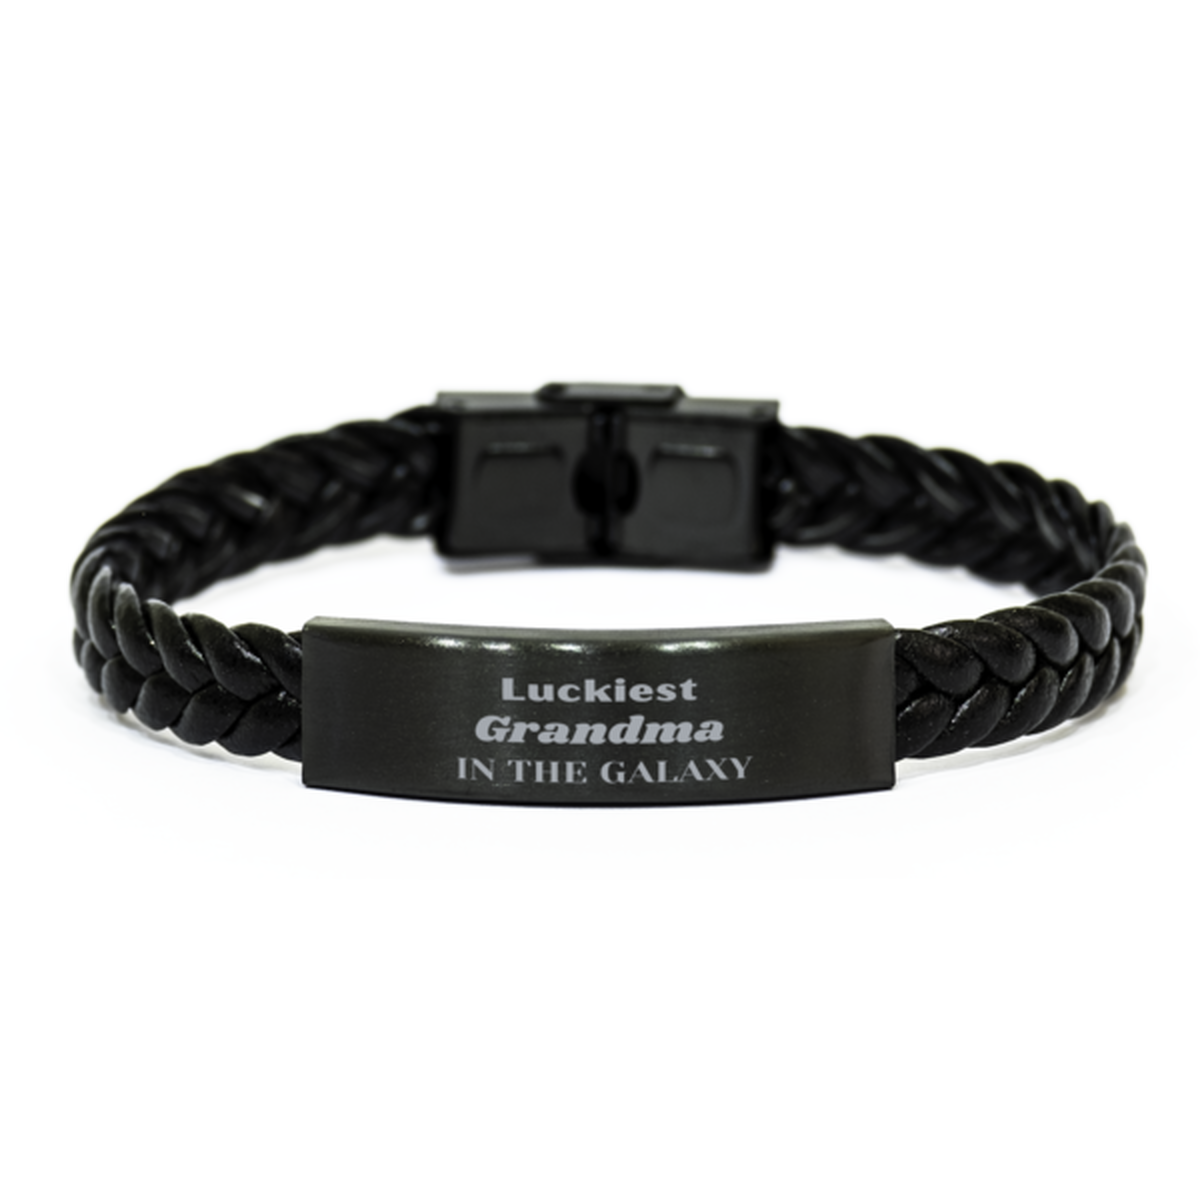 Luckiest Grandma in the Galaxy, To My Grandma Engraved Gifts, Christmas Grandma Braided Leather Bracelet Gifts, X-mas Birthday Unique Gifts For Grandma Men Women